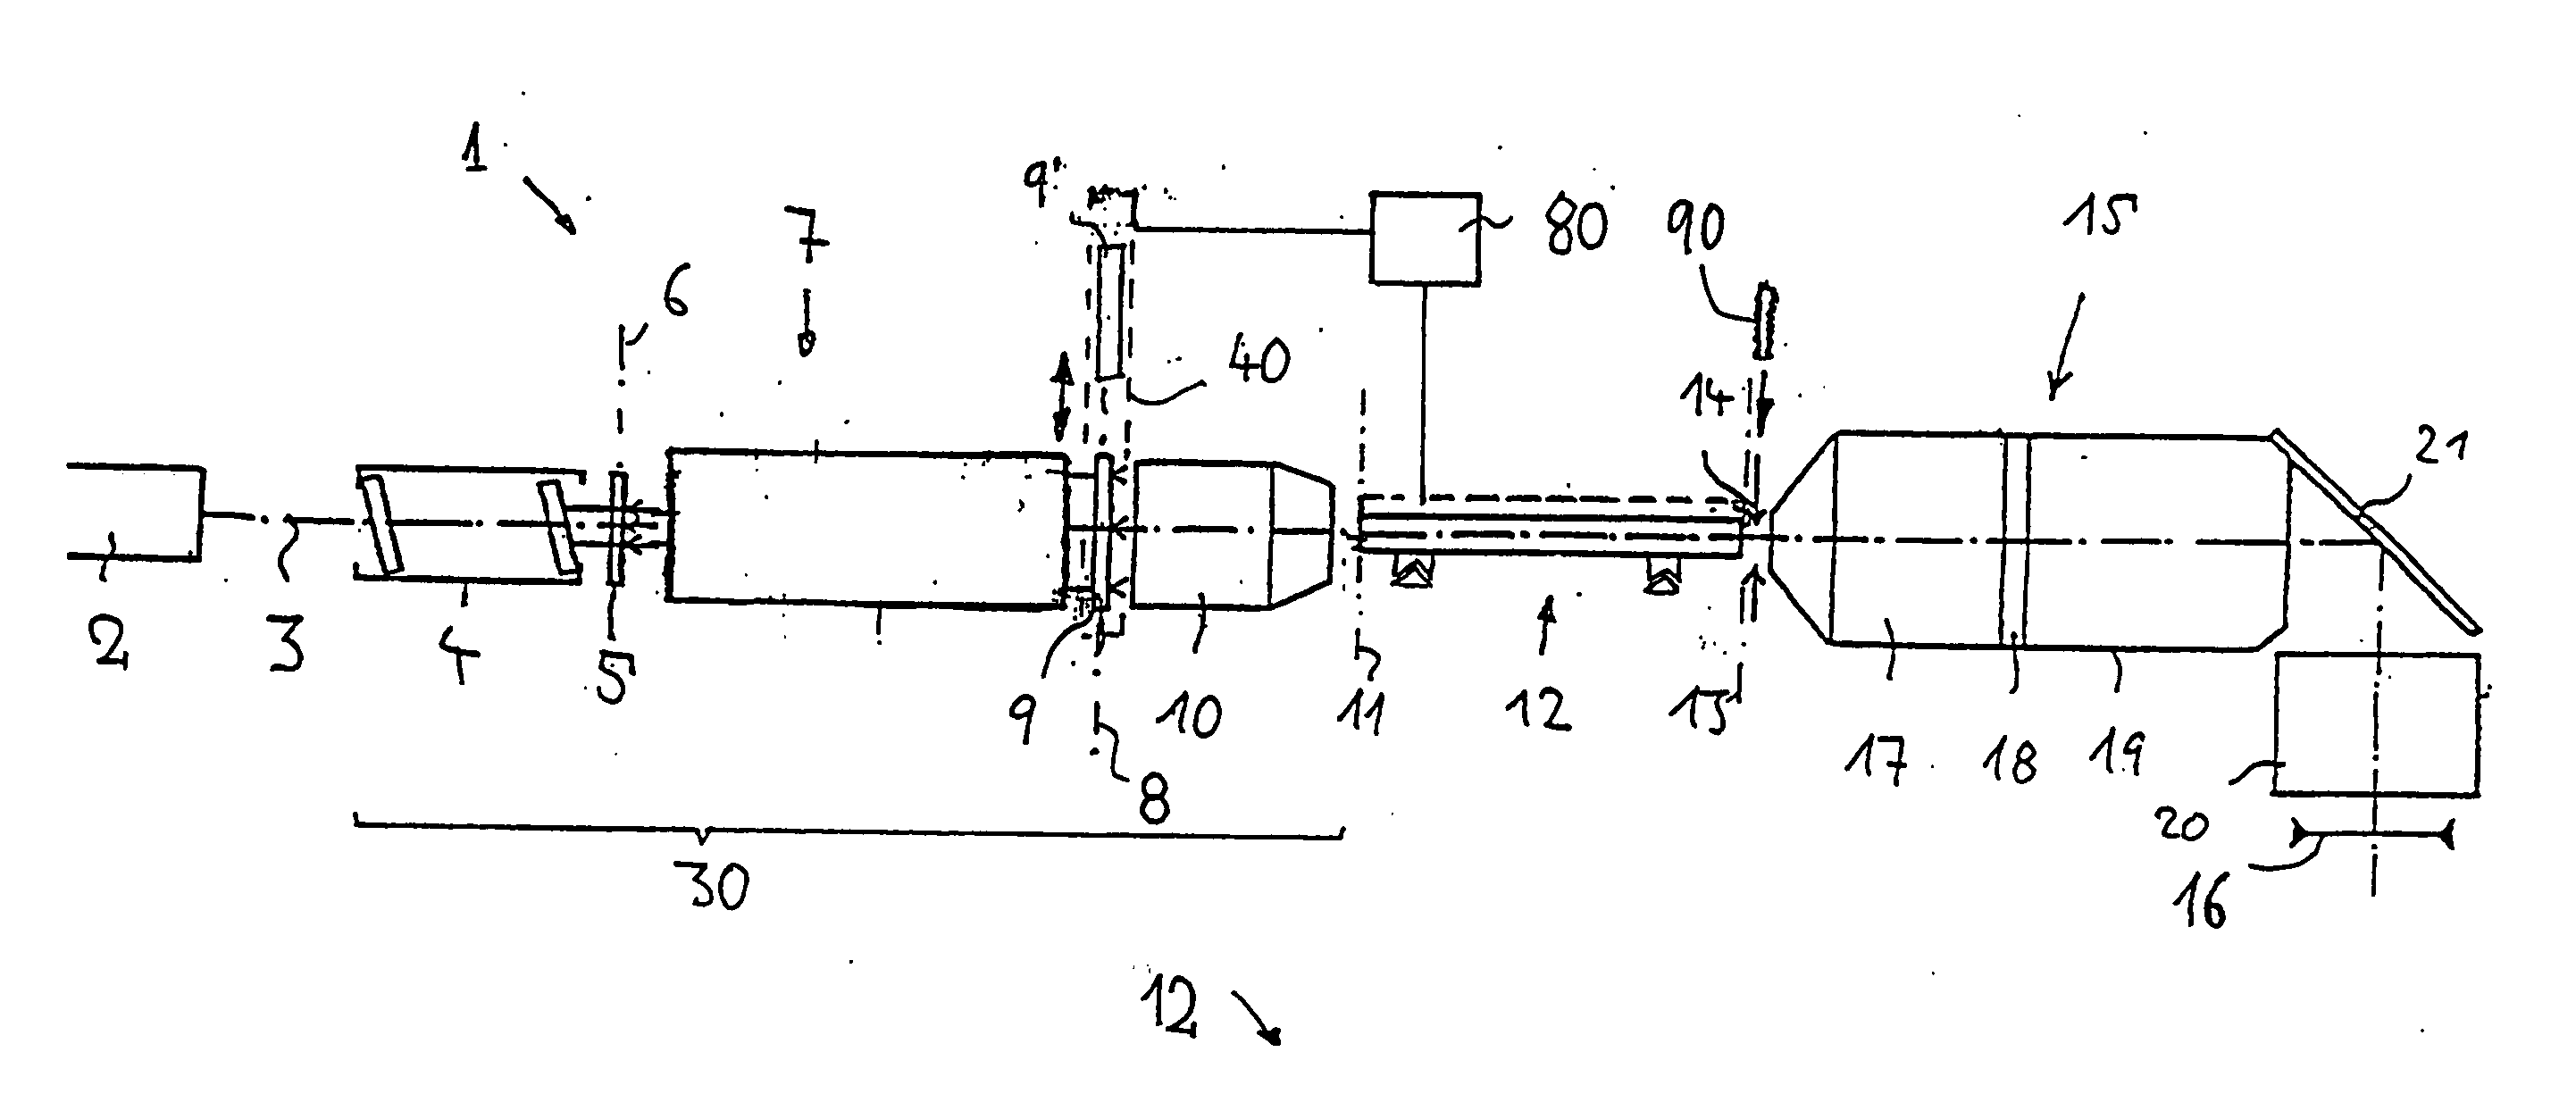 Illumination system for a microlithography projection exposure apparatus